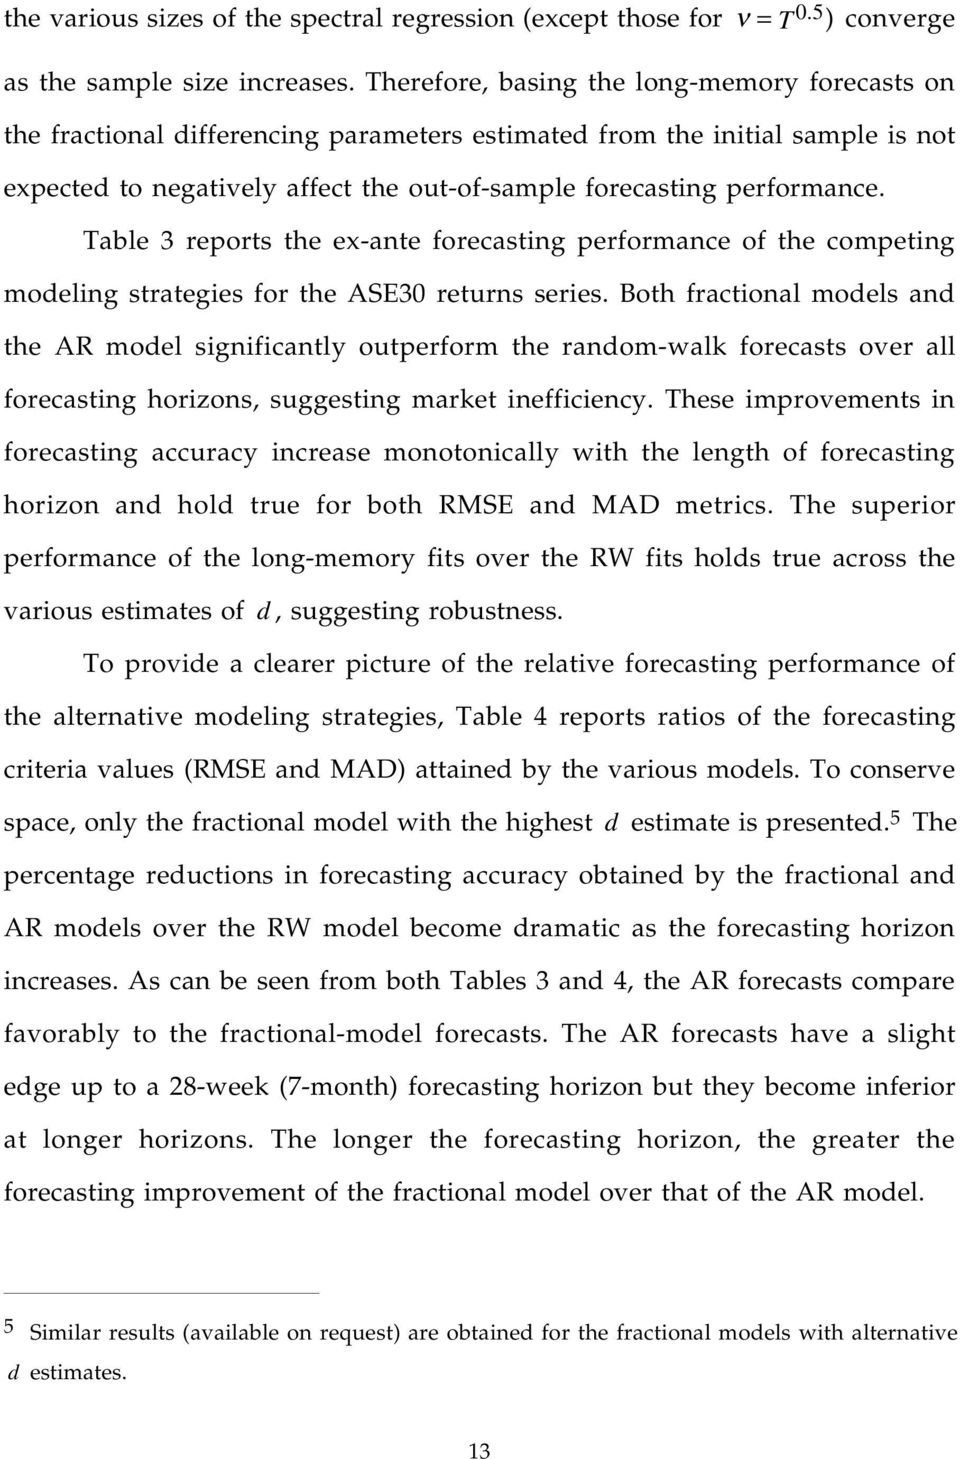 Table 3 reports the ex-ante forecasting performance of the competing modeling strategies for the ASE30 returns series.